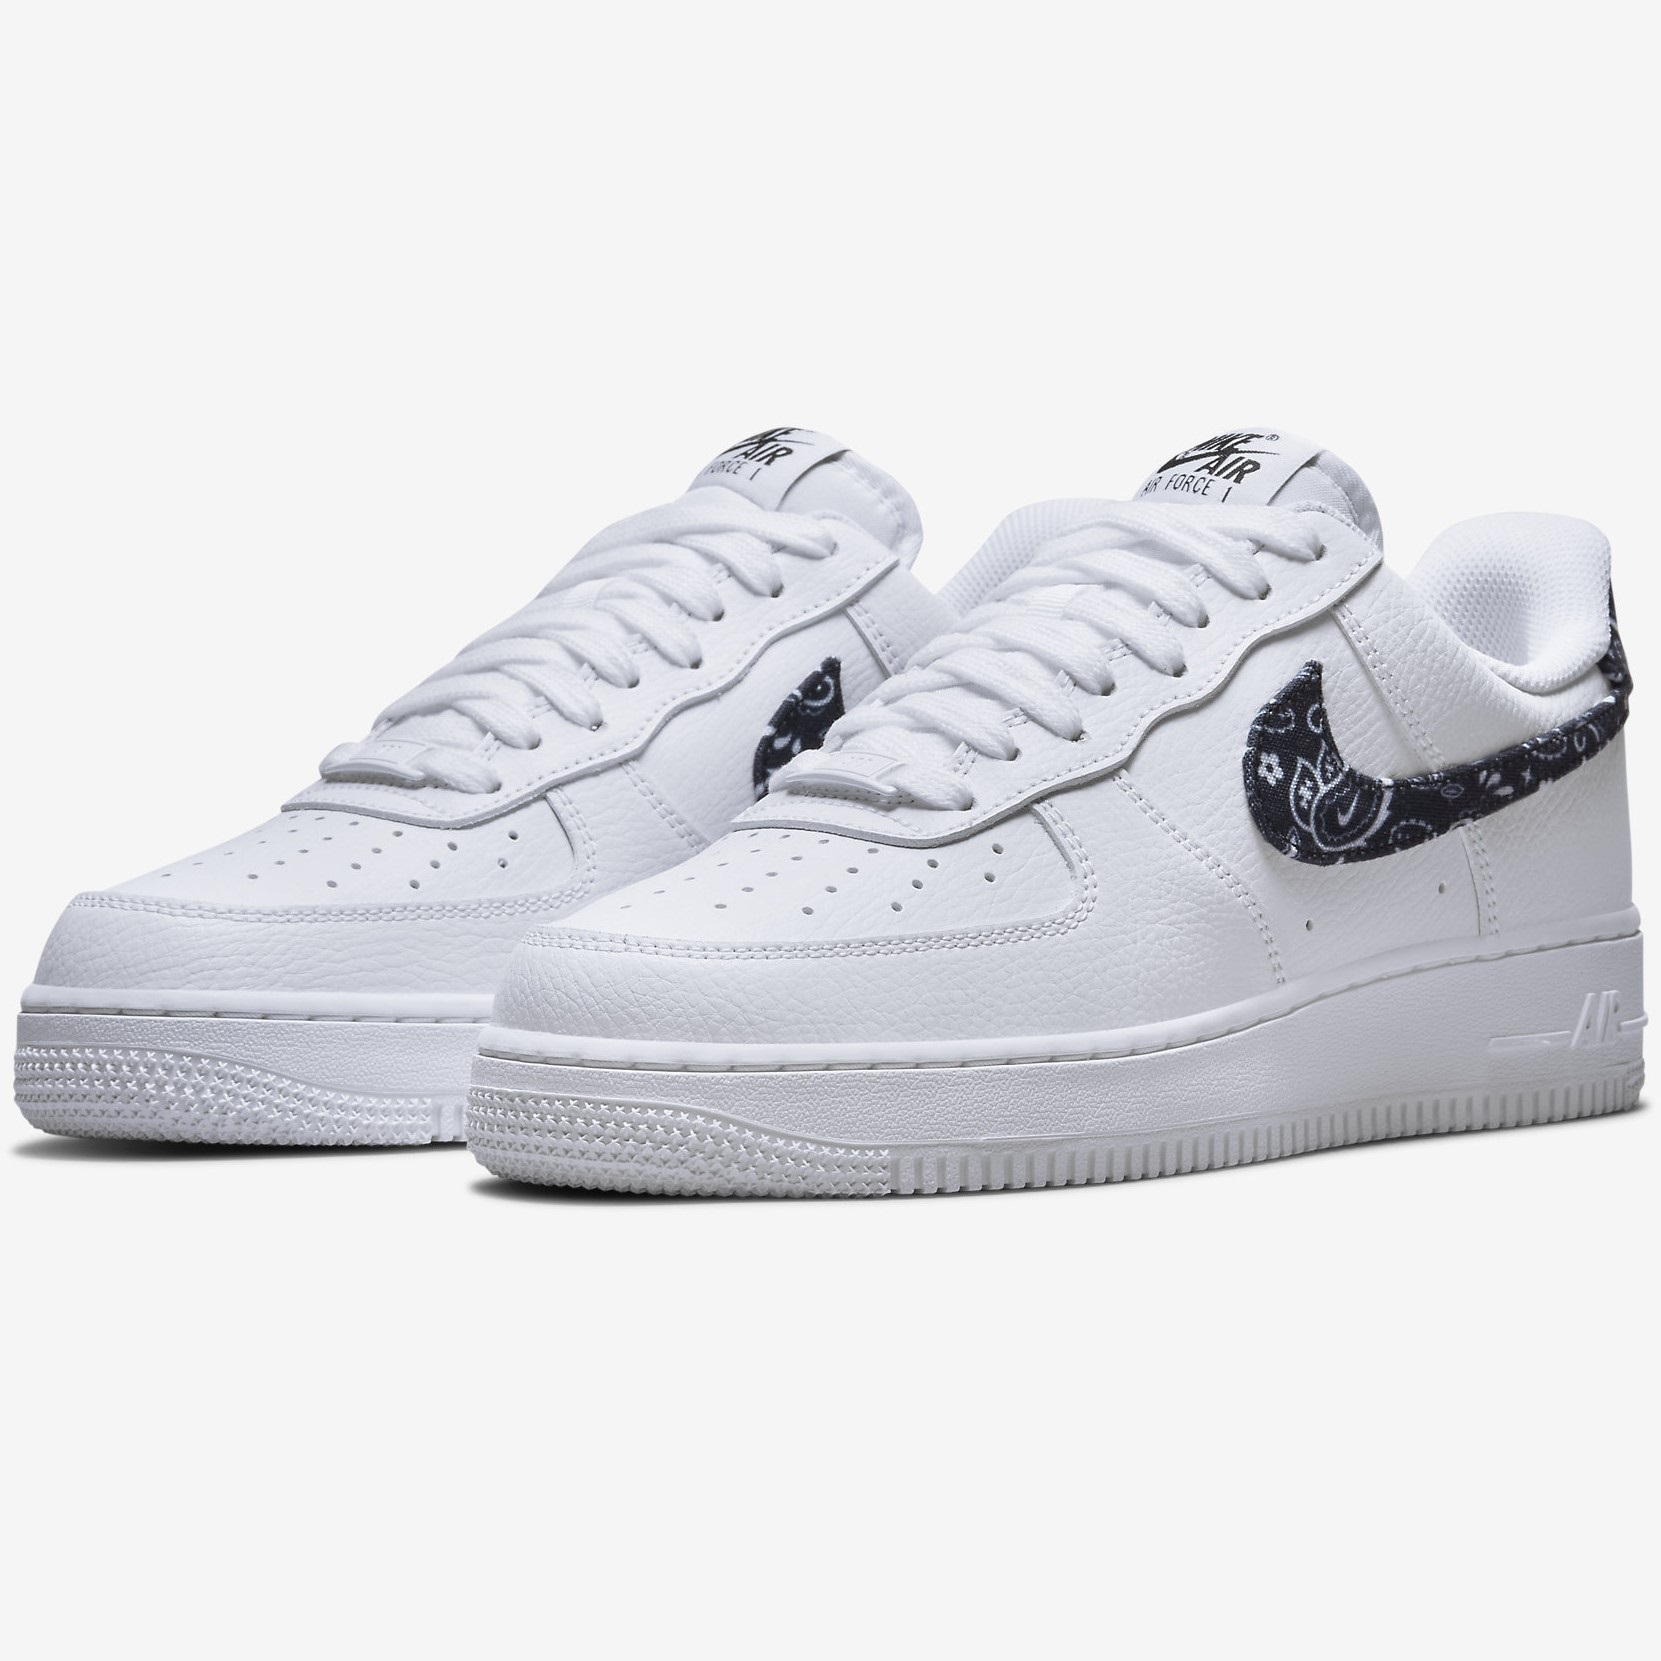 GIÀY THỂ THAO UNISEX NIKE AIR FORCE 1 LOW 07 ESSENTIALS ´BLACK PAISLEY´ DH4406-101 7